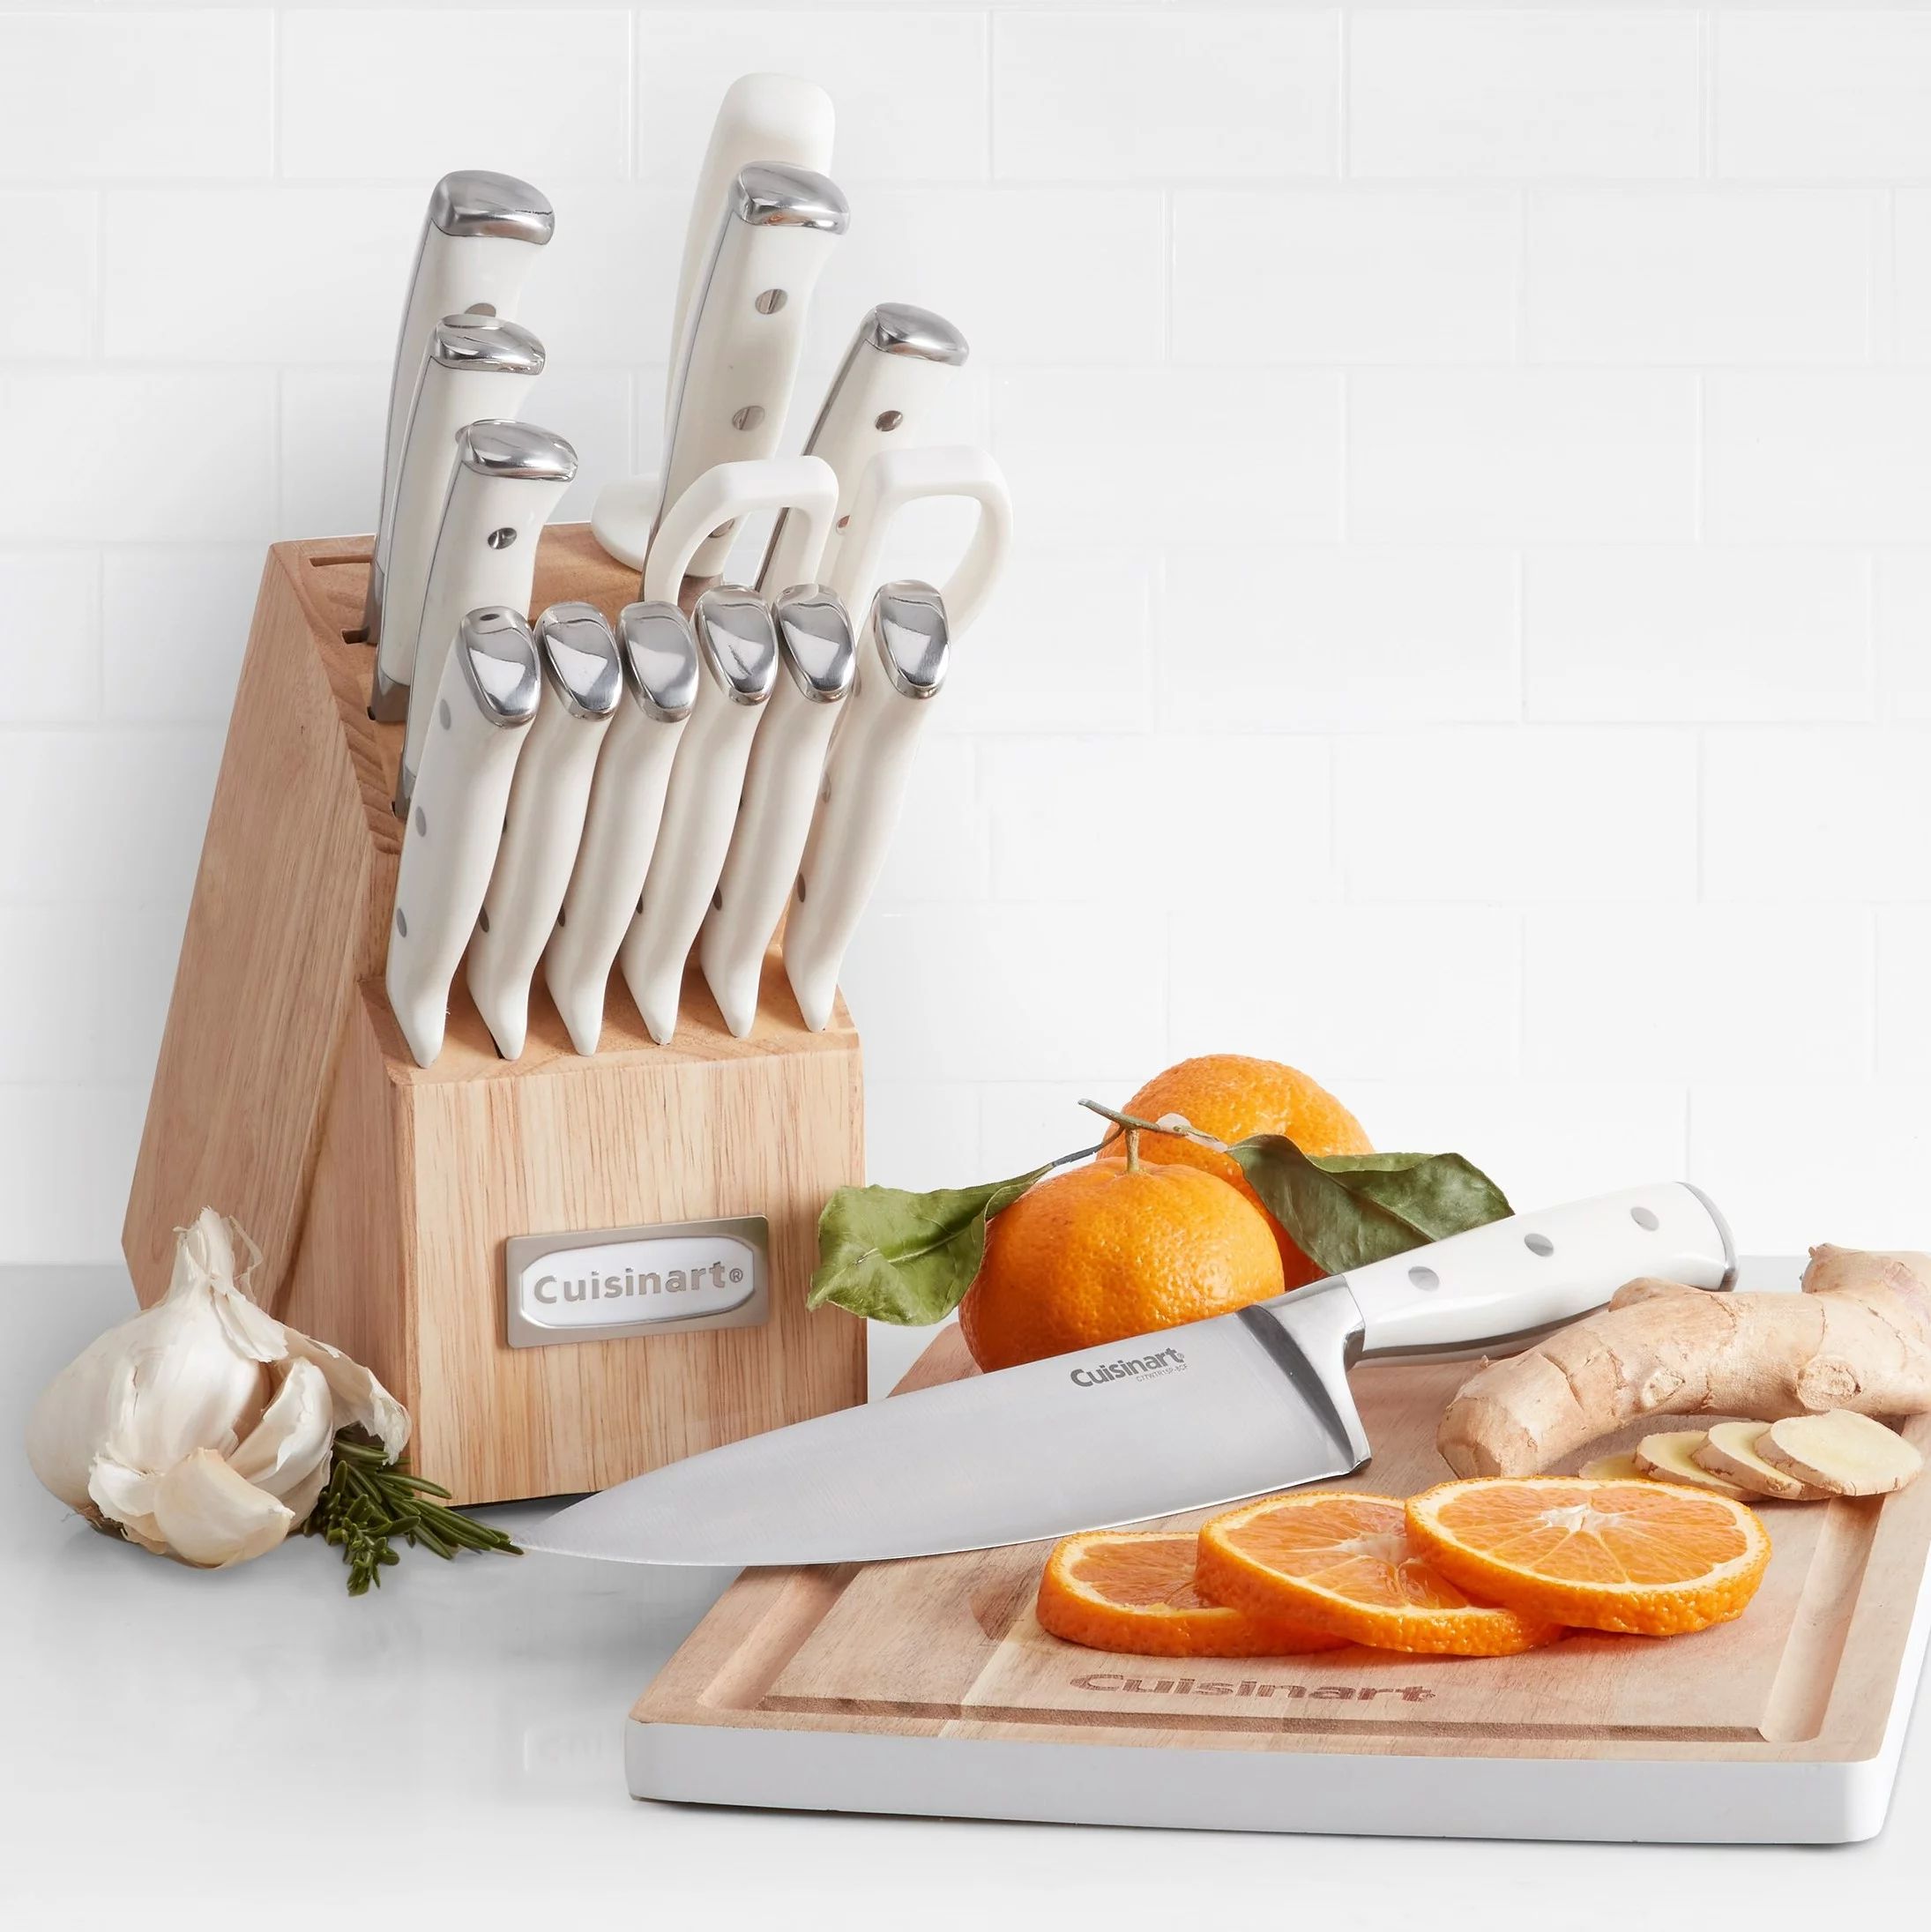 Cuisinart Classic Forged Triple Rivet 15-Piece Cutlery Set with Block, White and Stainless, C77WT... | Walmart (US)